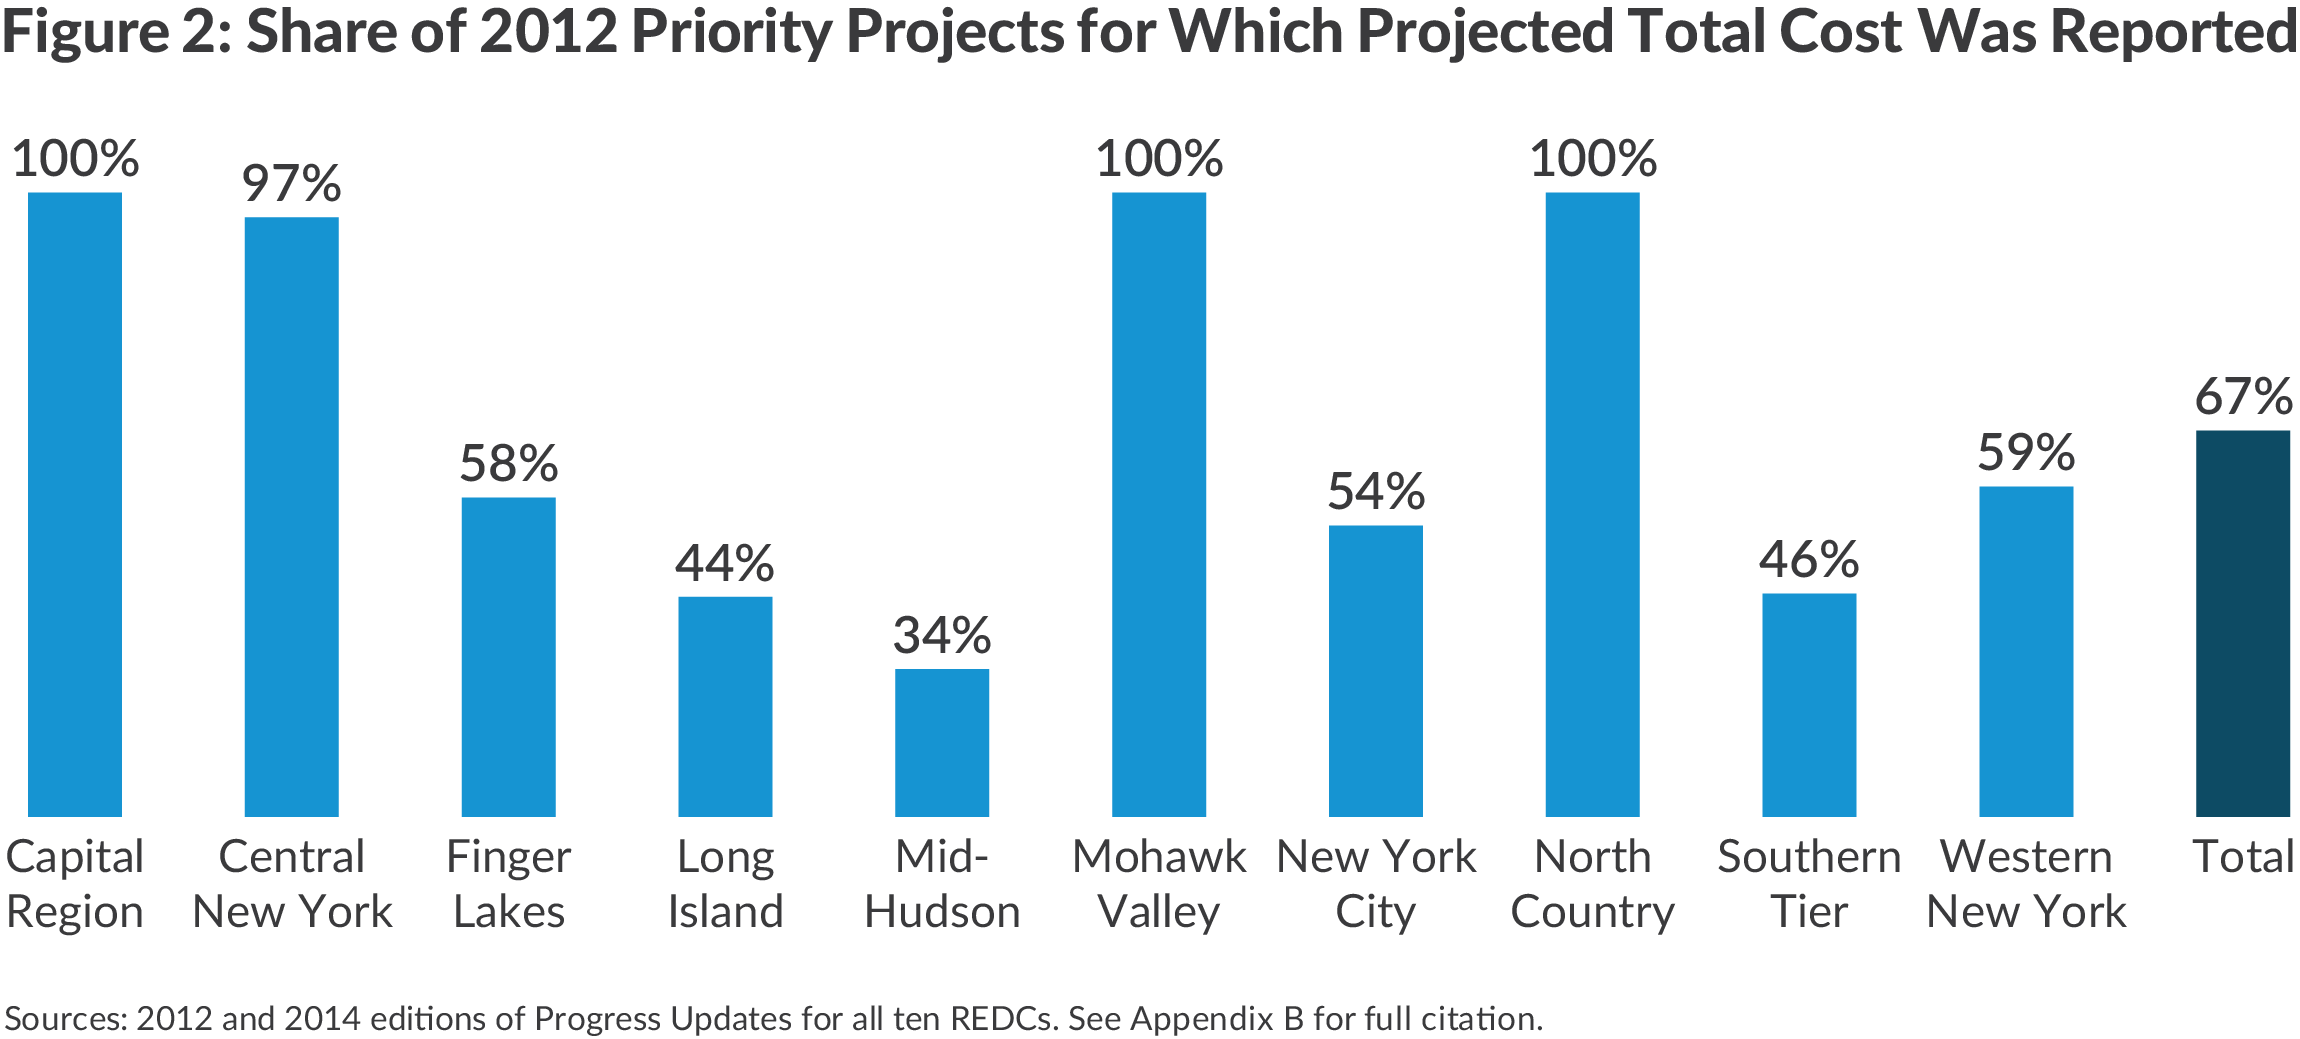 Bar chart showing share of 2012 priority projects with total cost report by Regional Economic Development Council